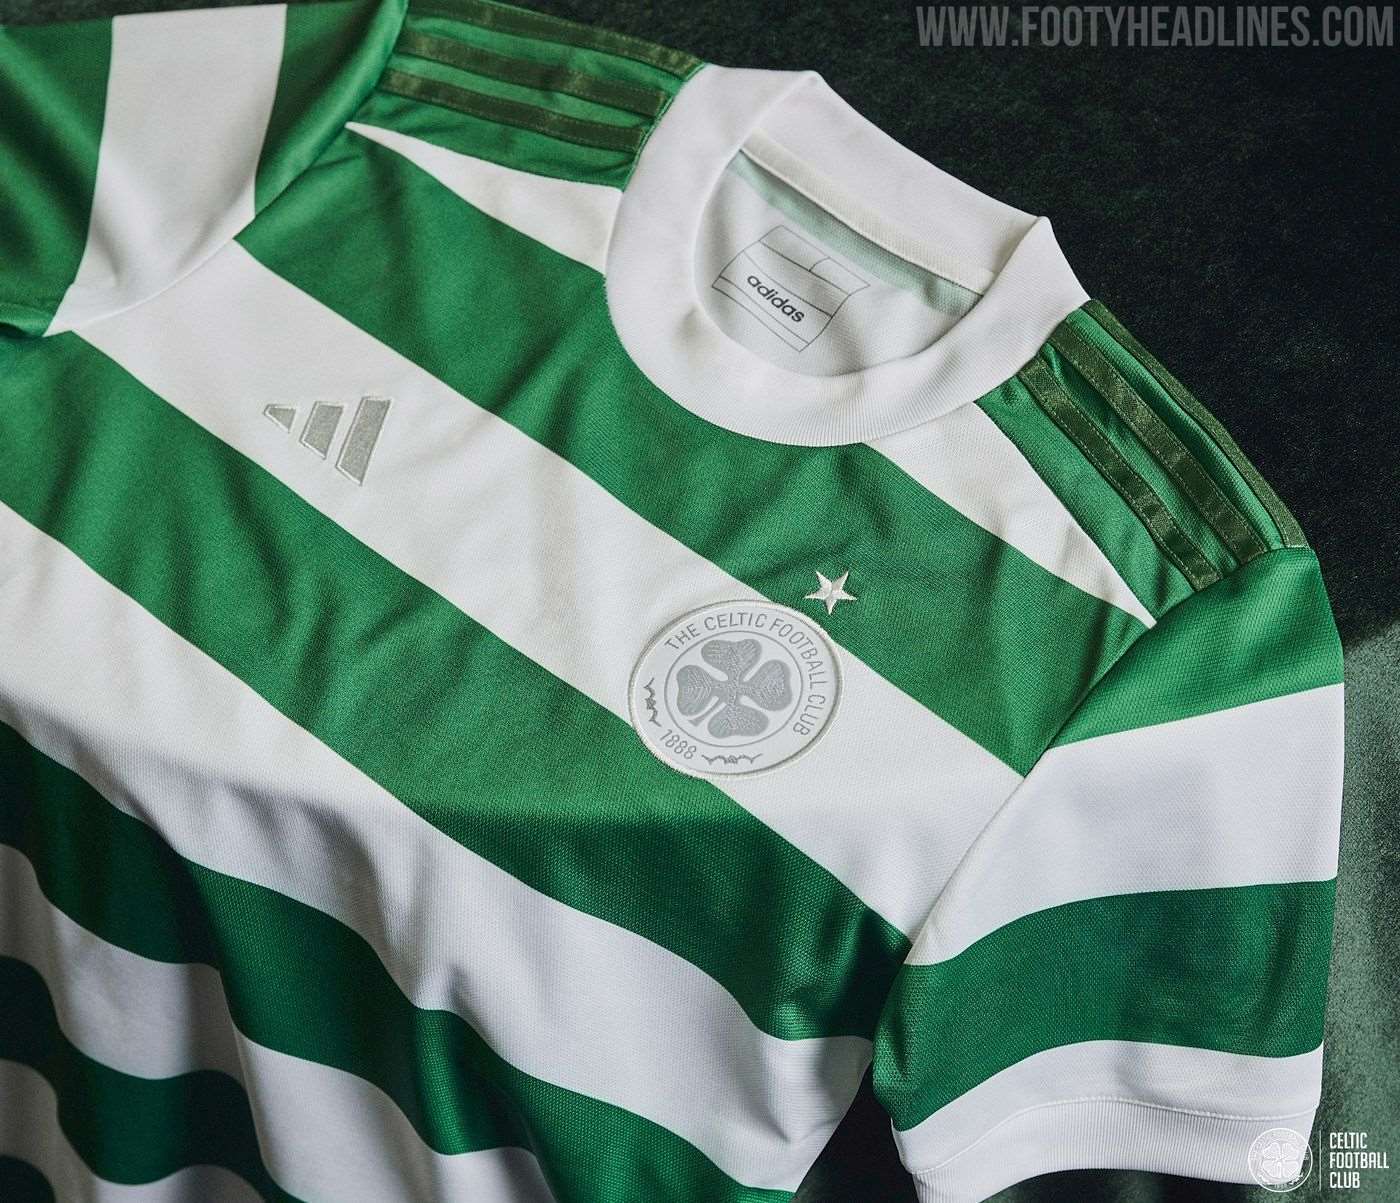 In Pictures: Celtic launch new home kit for 2015/16 season as fans flock to  Parkhead - Daily Record